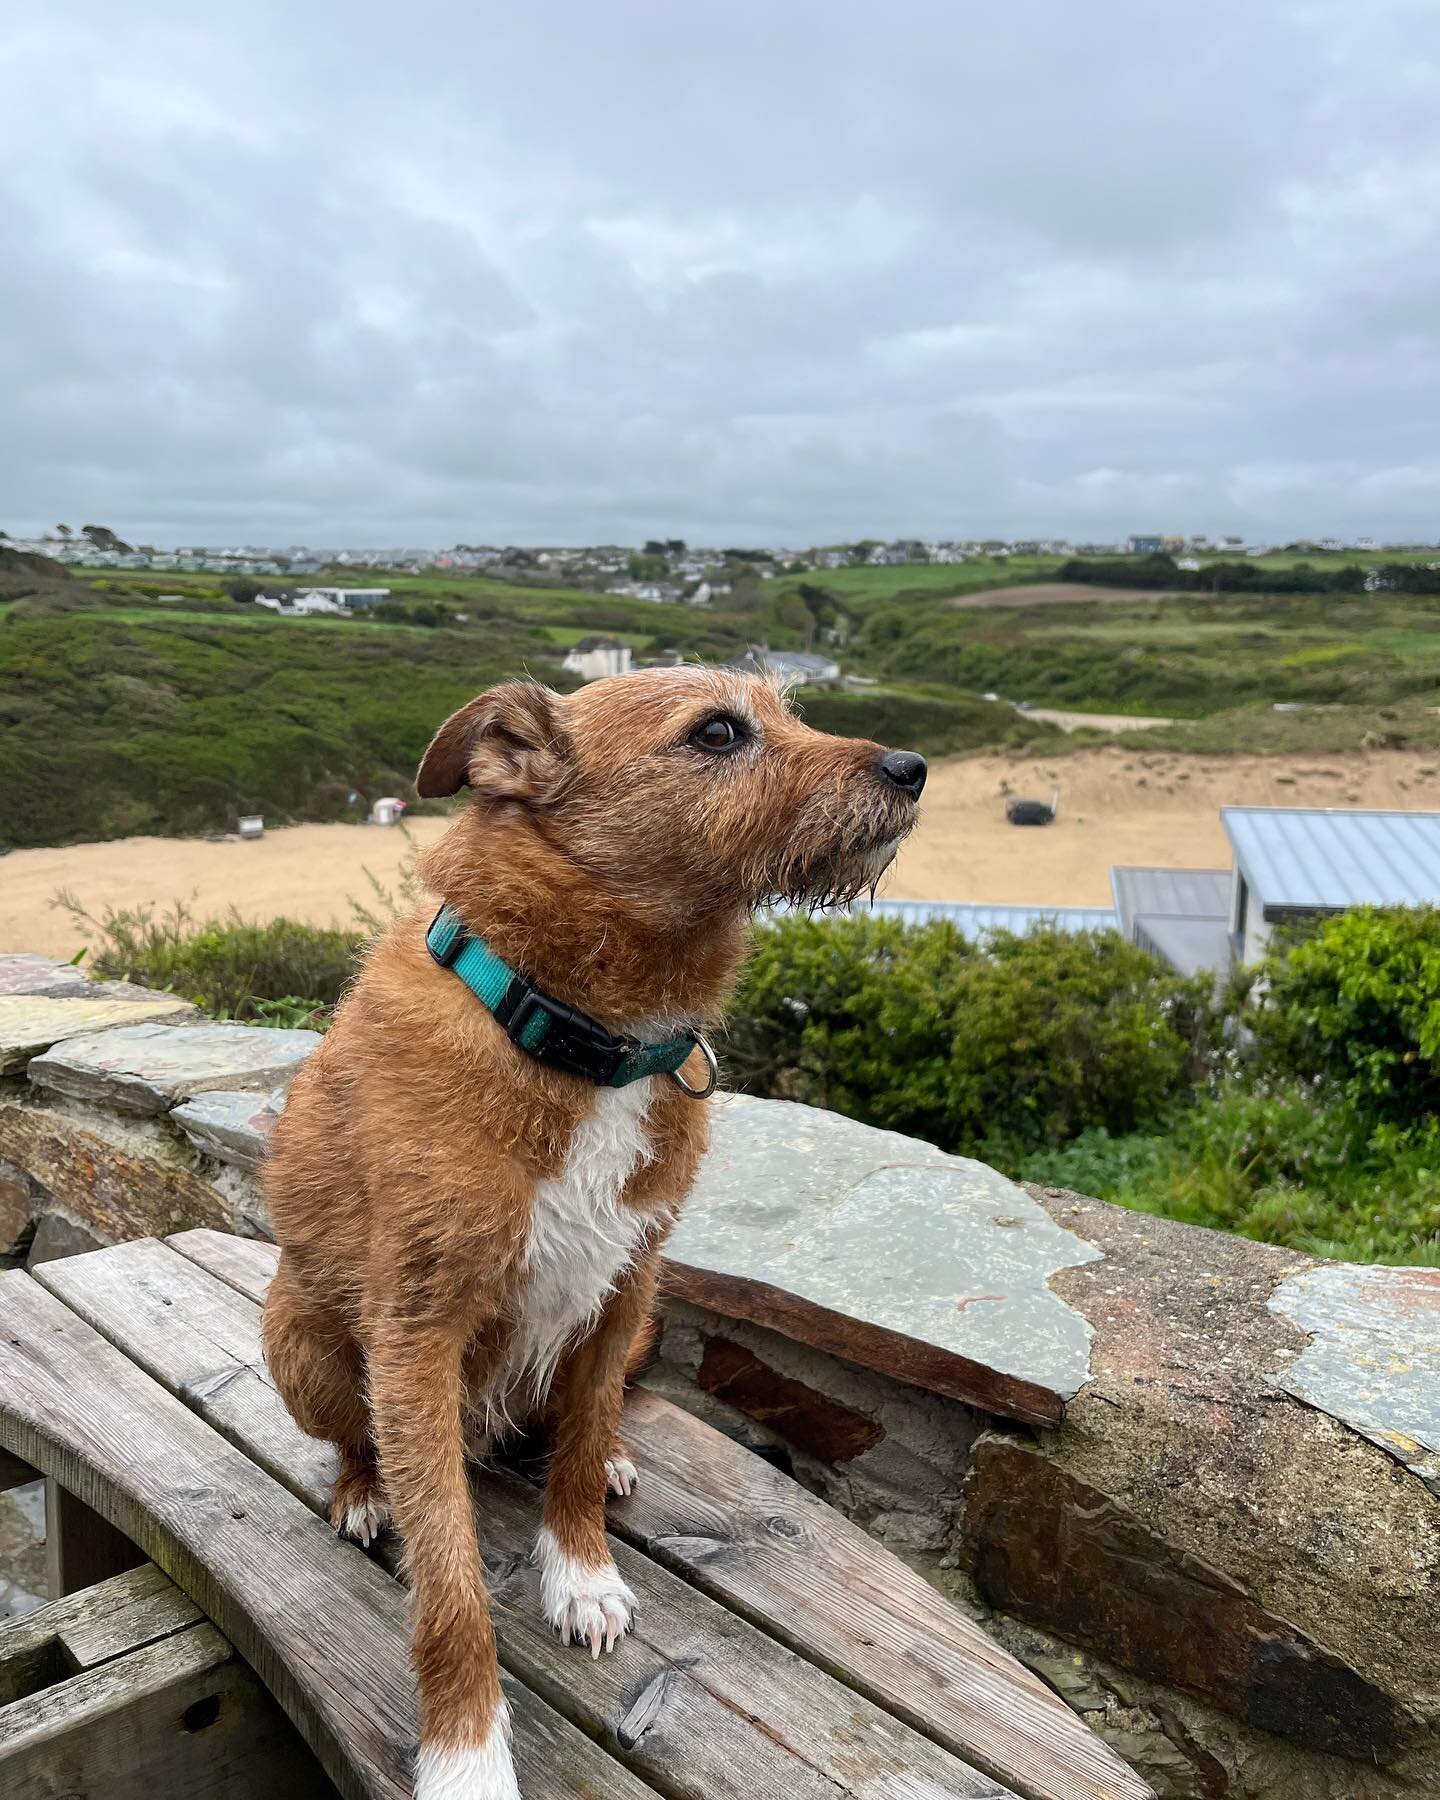 Rusty Dog enjoyed his sausage with a view this morning @fern_pit_cafe_and_ferry #newquay #fistralbeach #thegannel